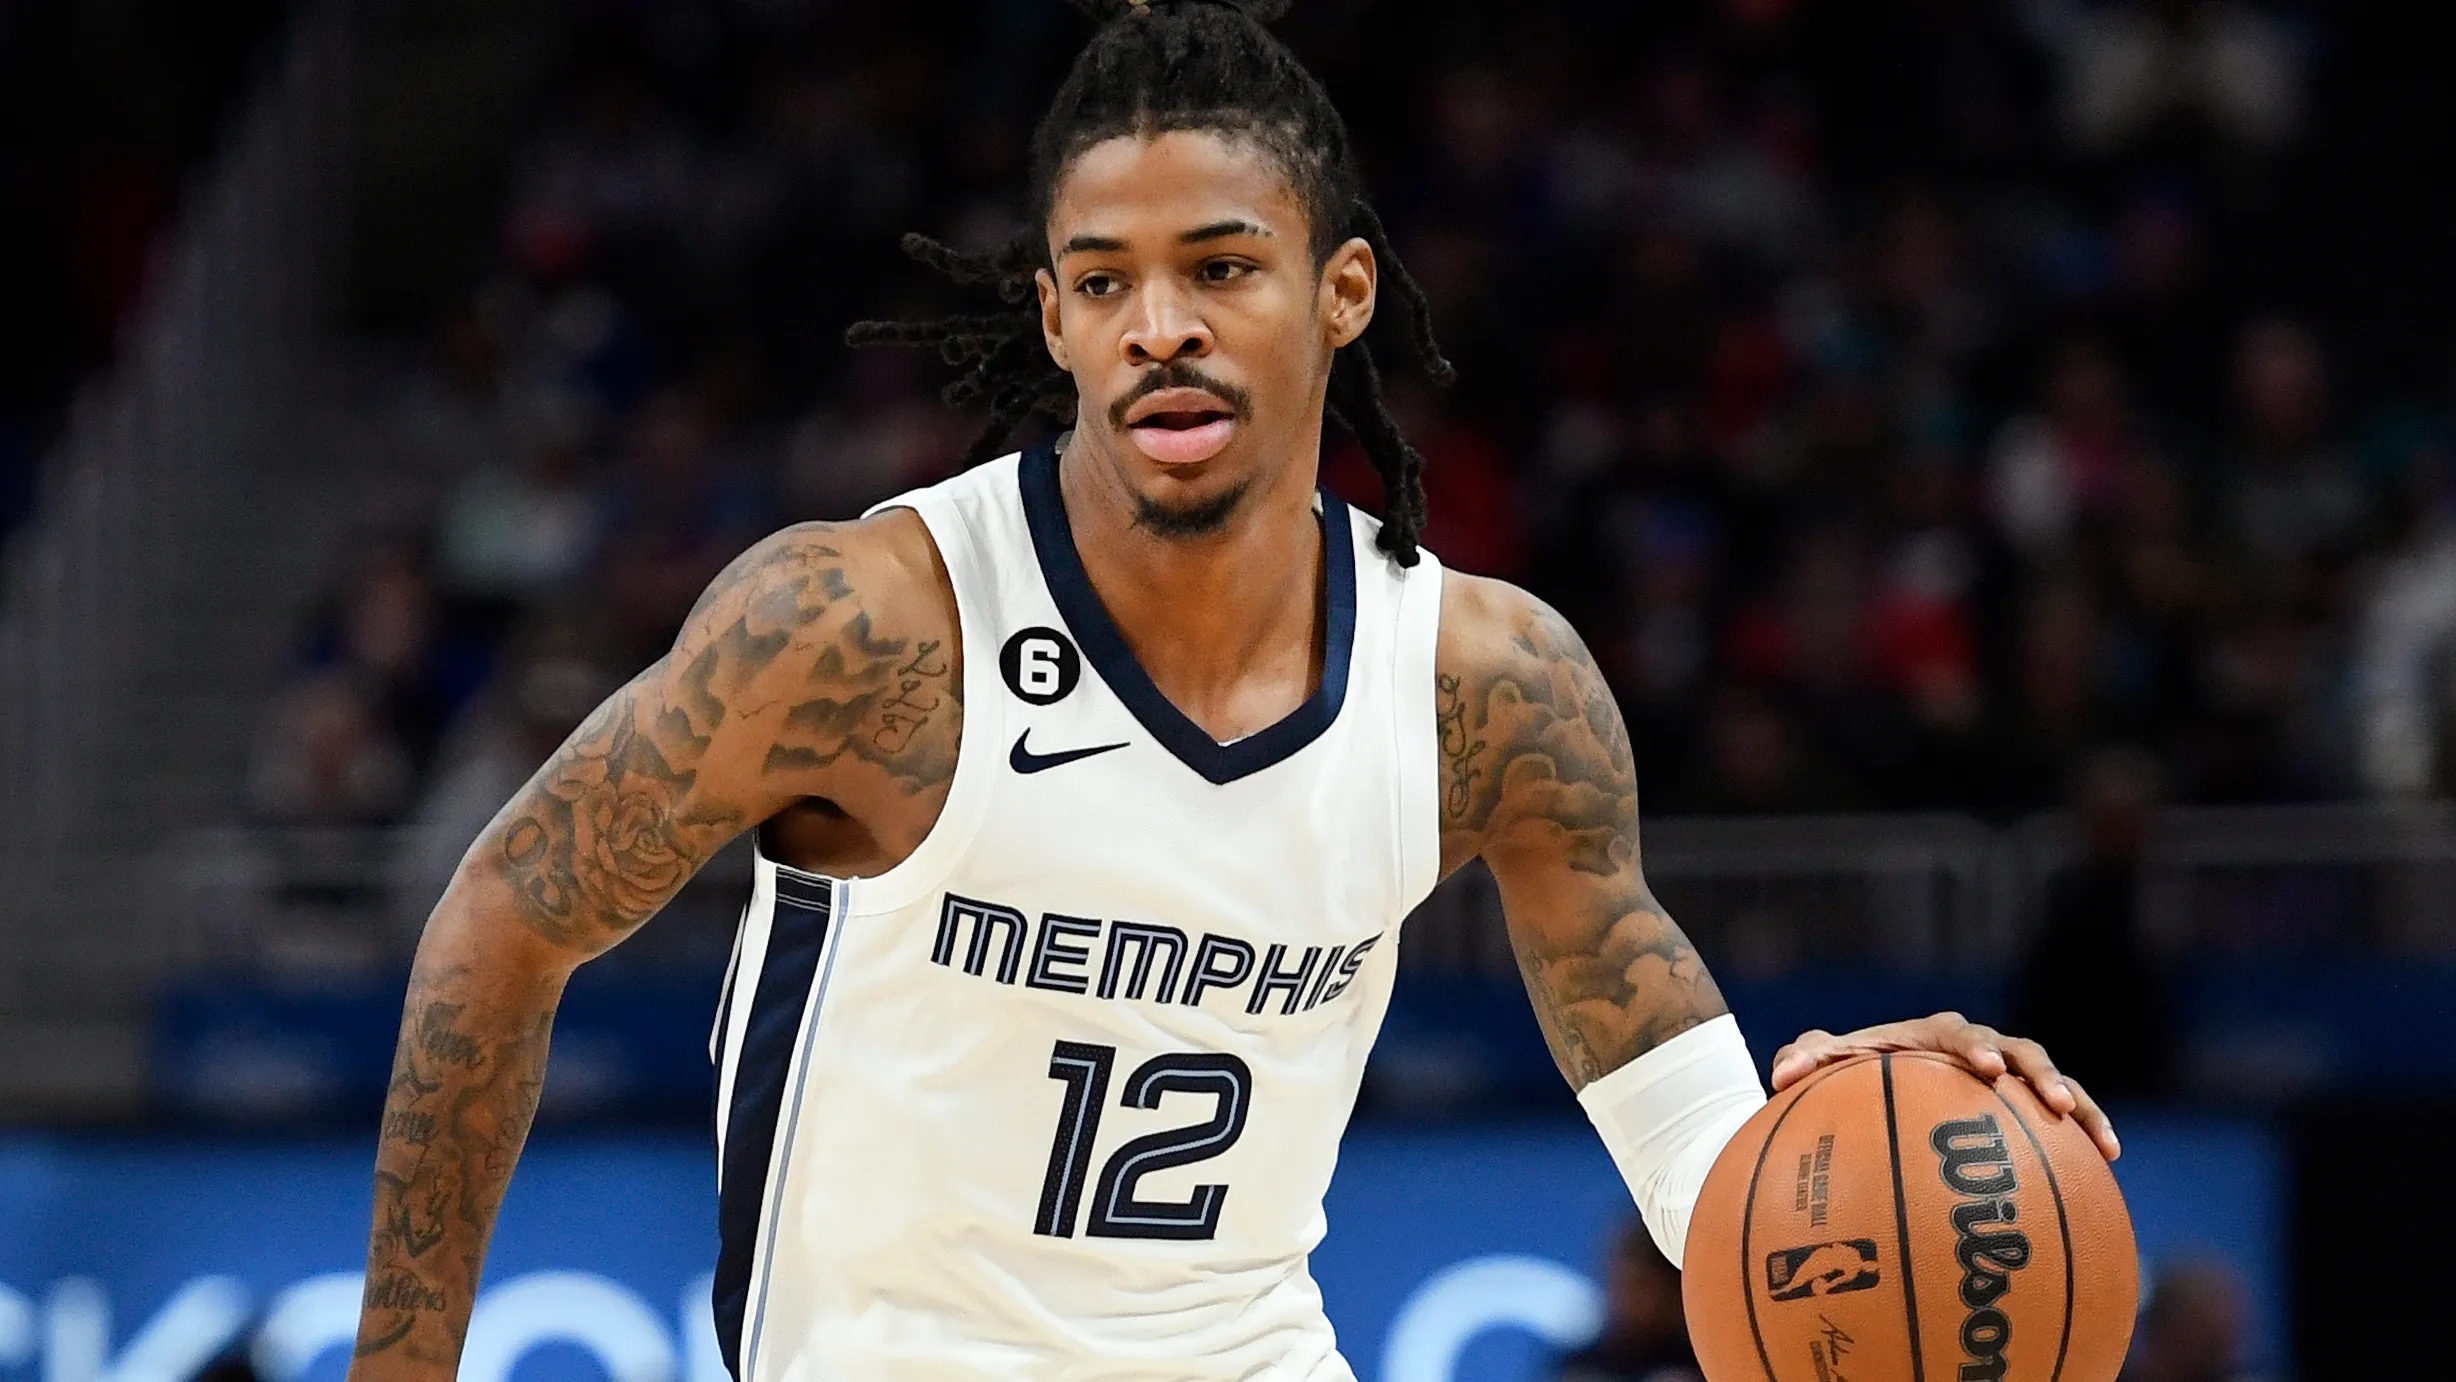 Adrian Wojnarowski on X: ESPN Sources: Grizzlies star Ja Morant met with  NBA commissioner Adam Silver in New York today. Morant has left a  counseling program in Florida and moves closer to